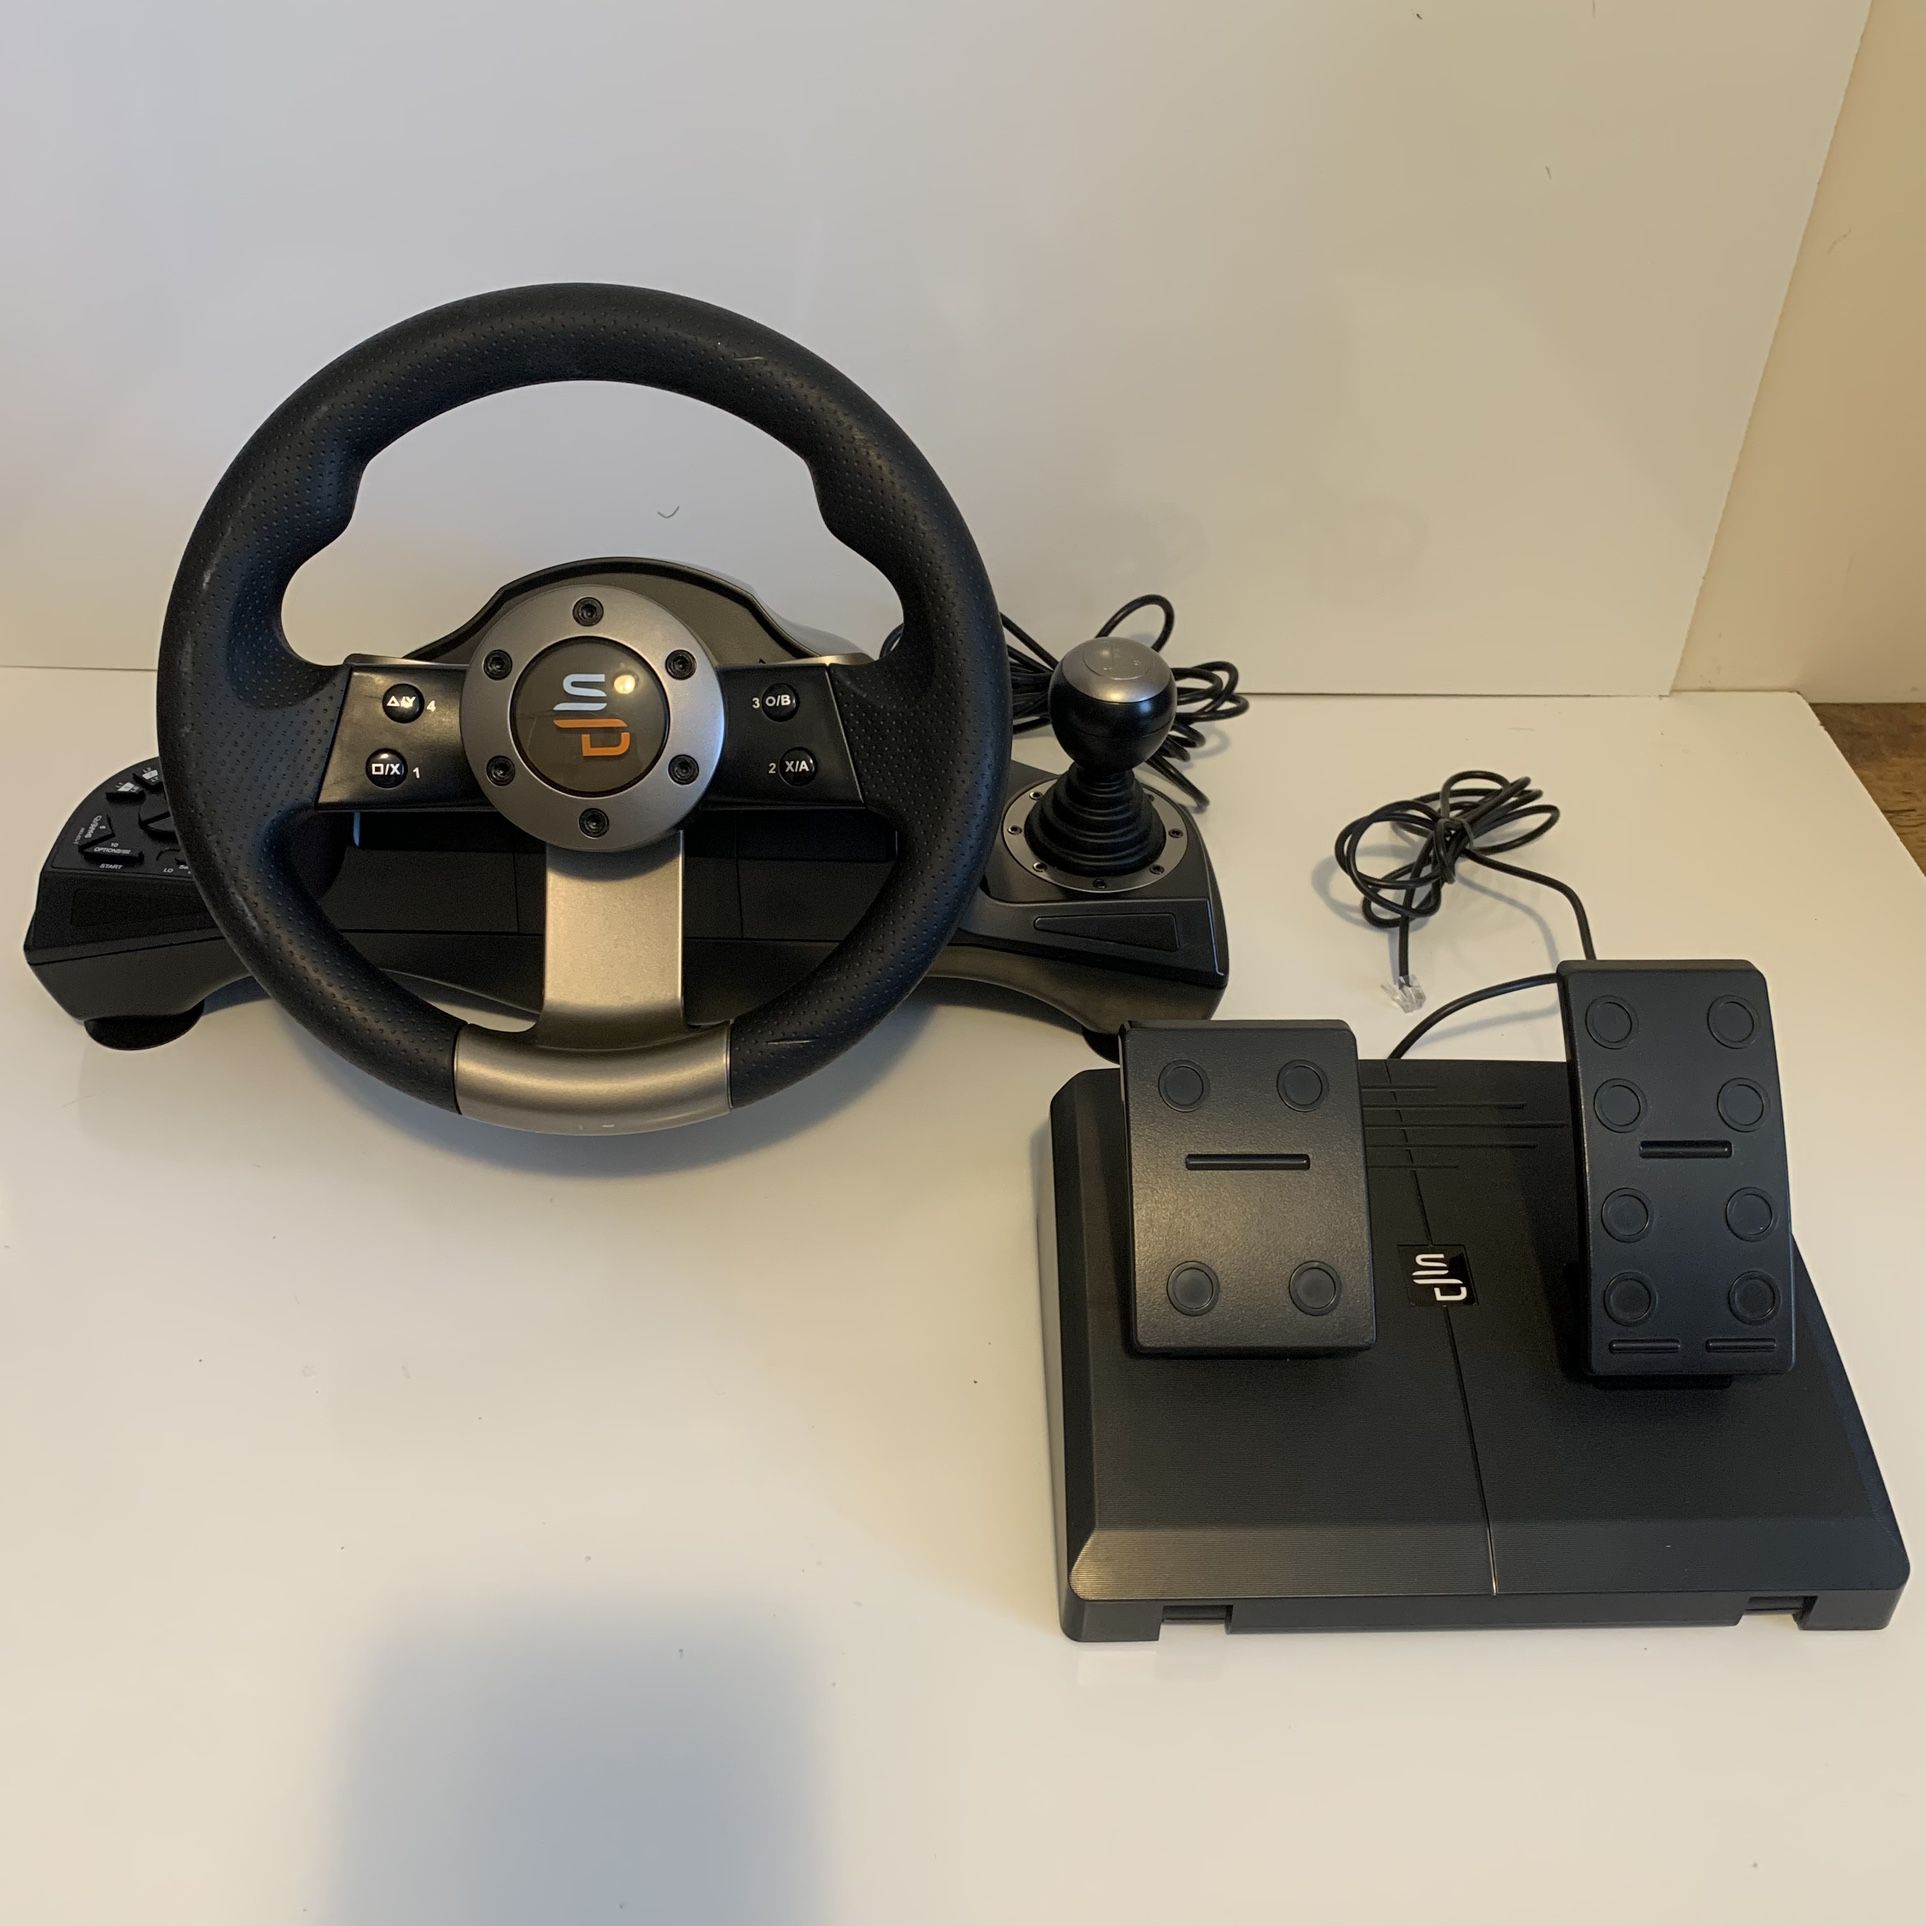 Subsonic SA5156 Drive Pro GS 700 Racing Wheel & Pedals for PS3 PS4 Xbox One PC